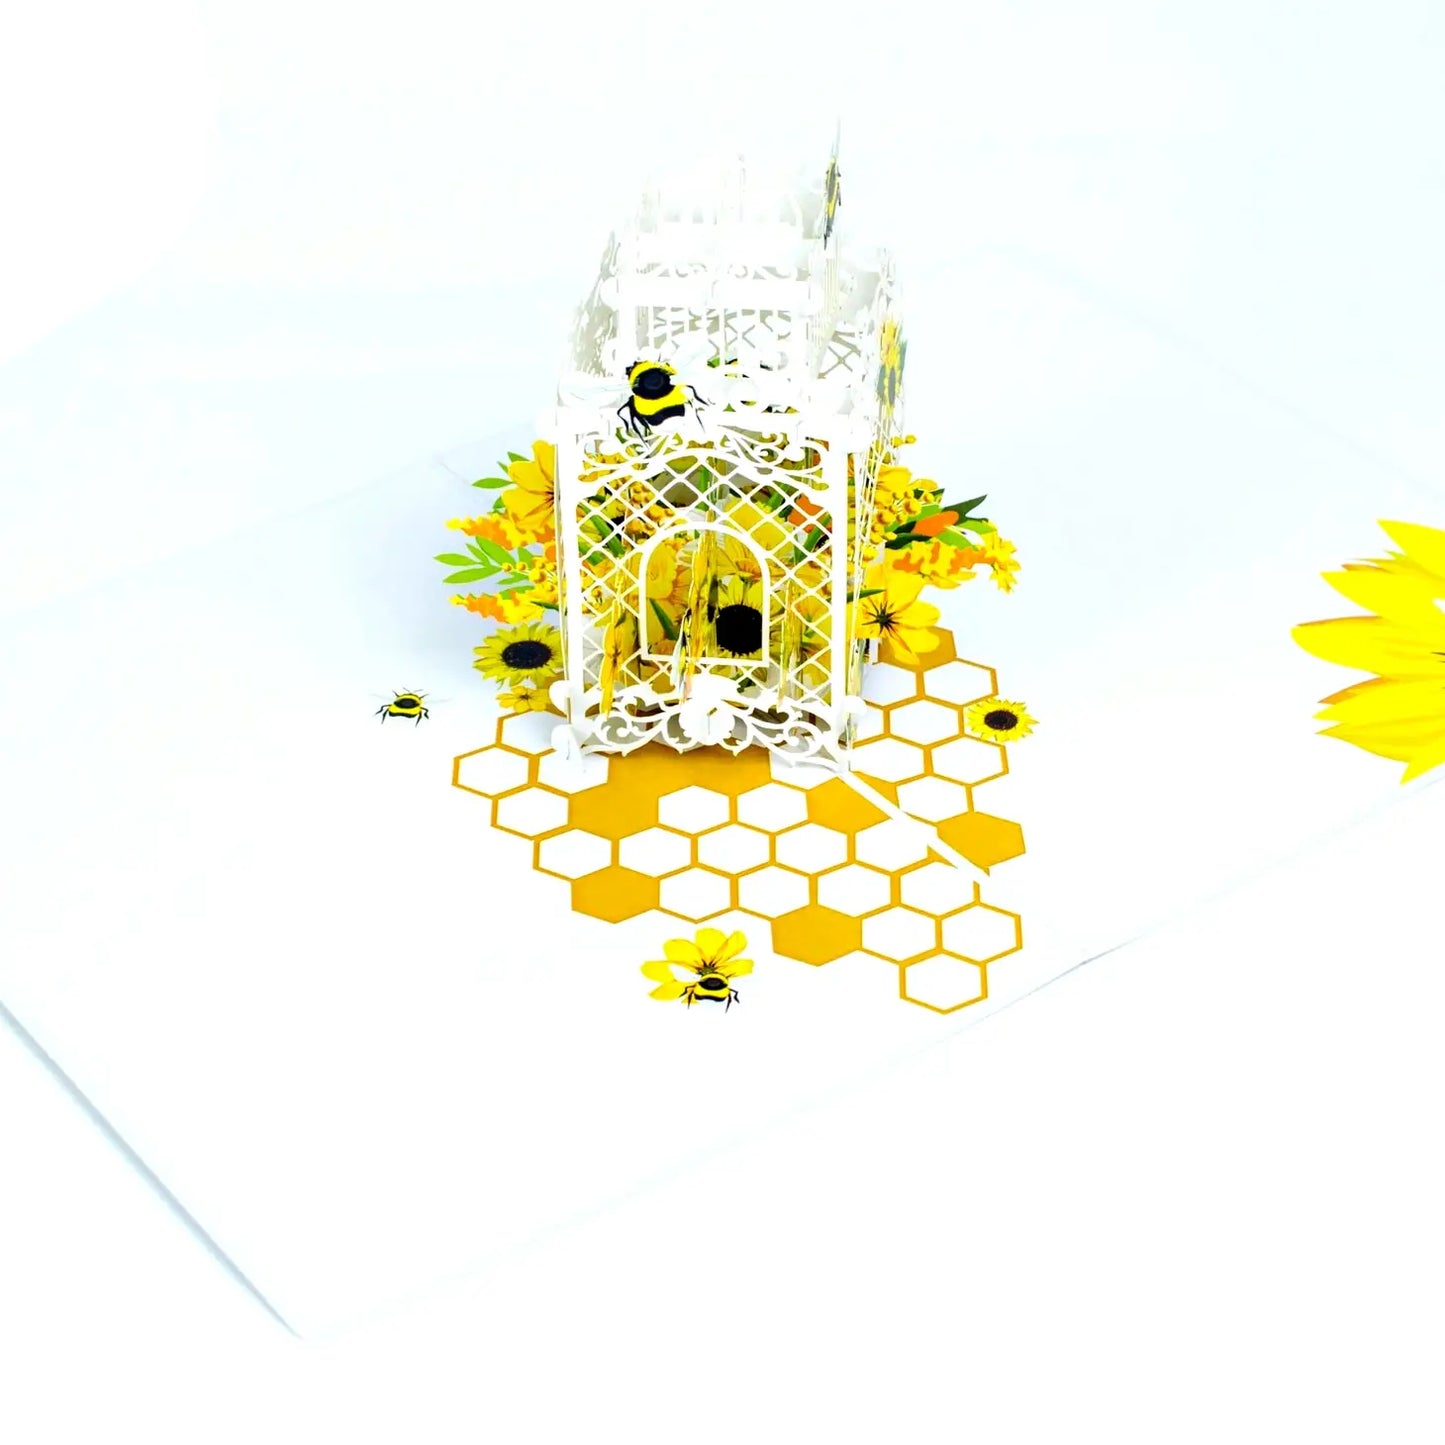 Wonder Paper Art - Bees 3D pop up Card/Will Mail For You